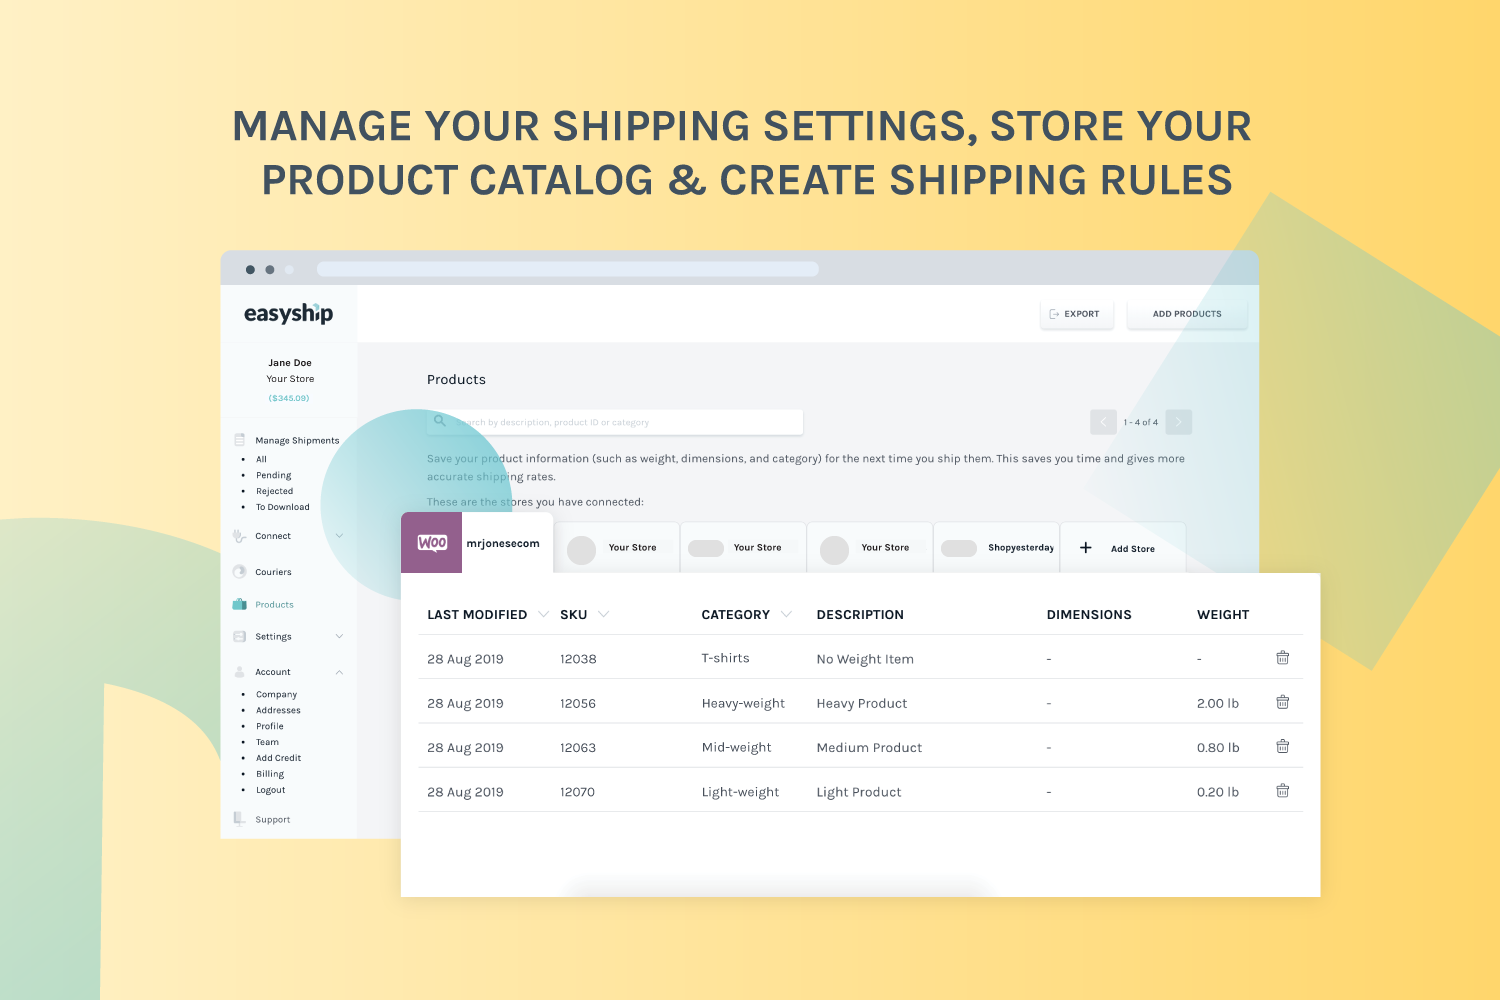 Manage your shipping settings, store your product catalog & create shipping rules